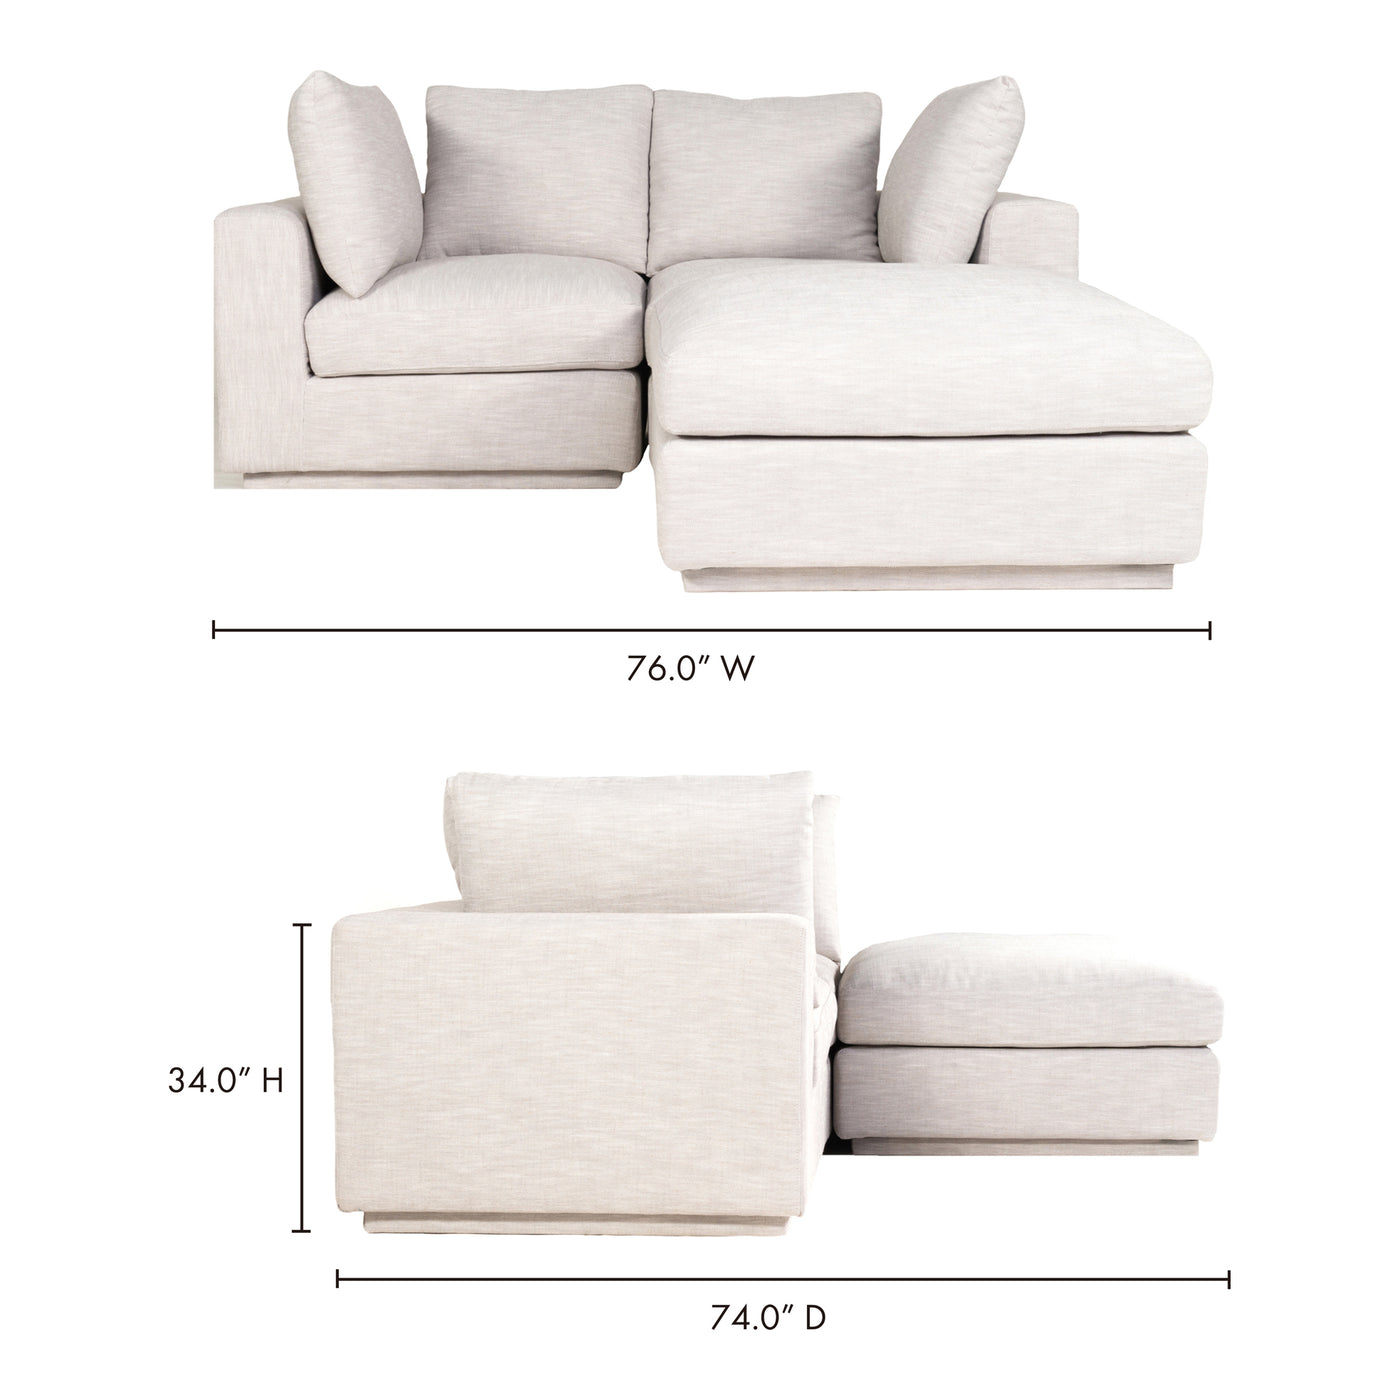 An everyday modular marvel. The Justin nook modular sectional is all about options, so sizing and space-fitting are up to ...